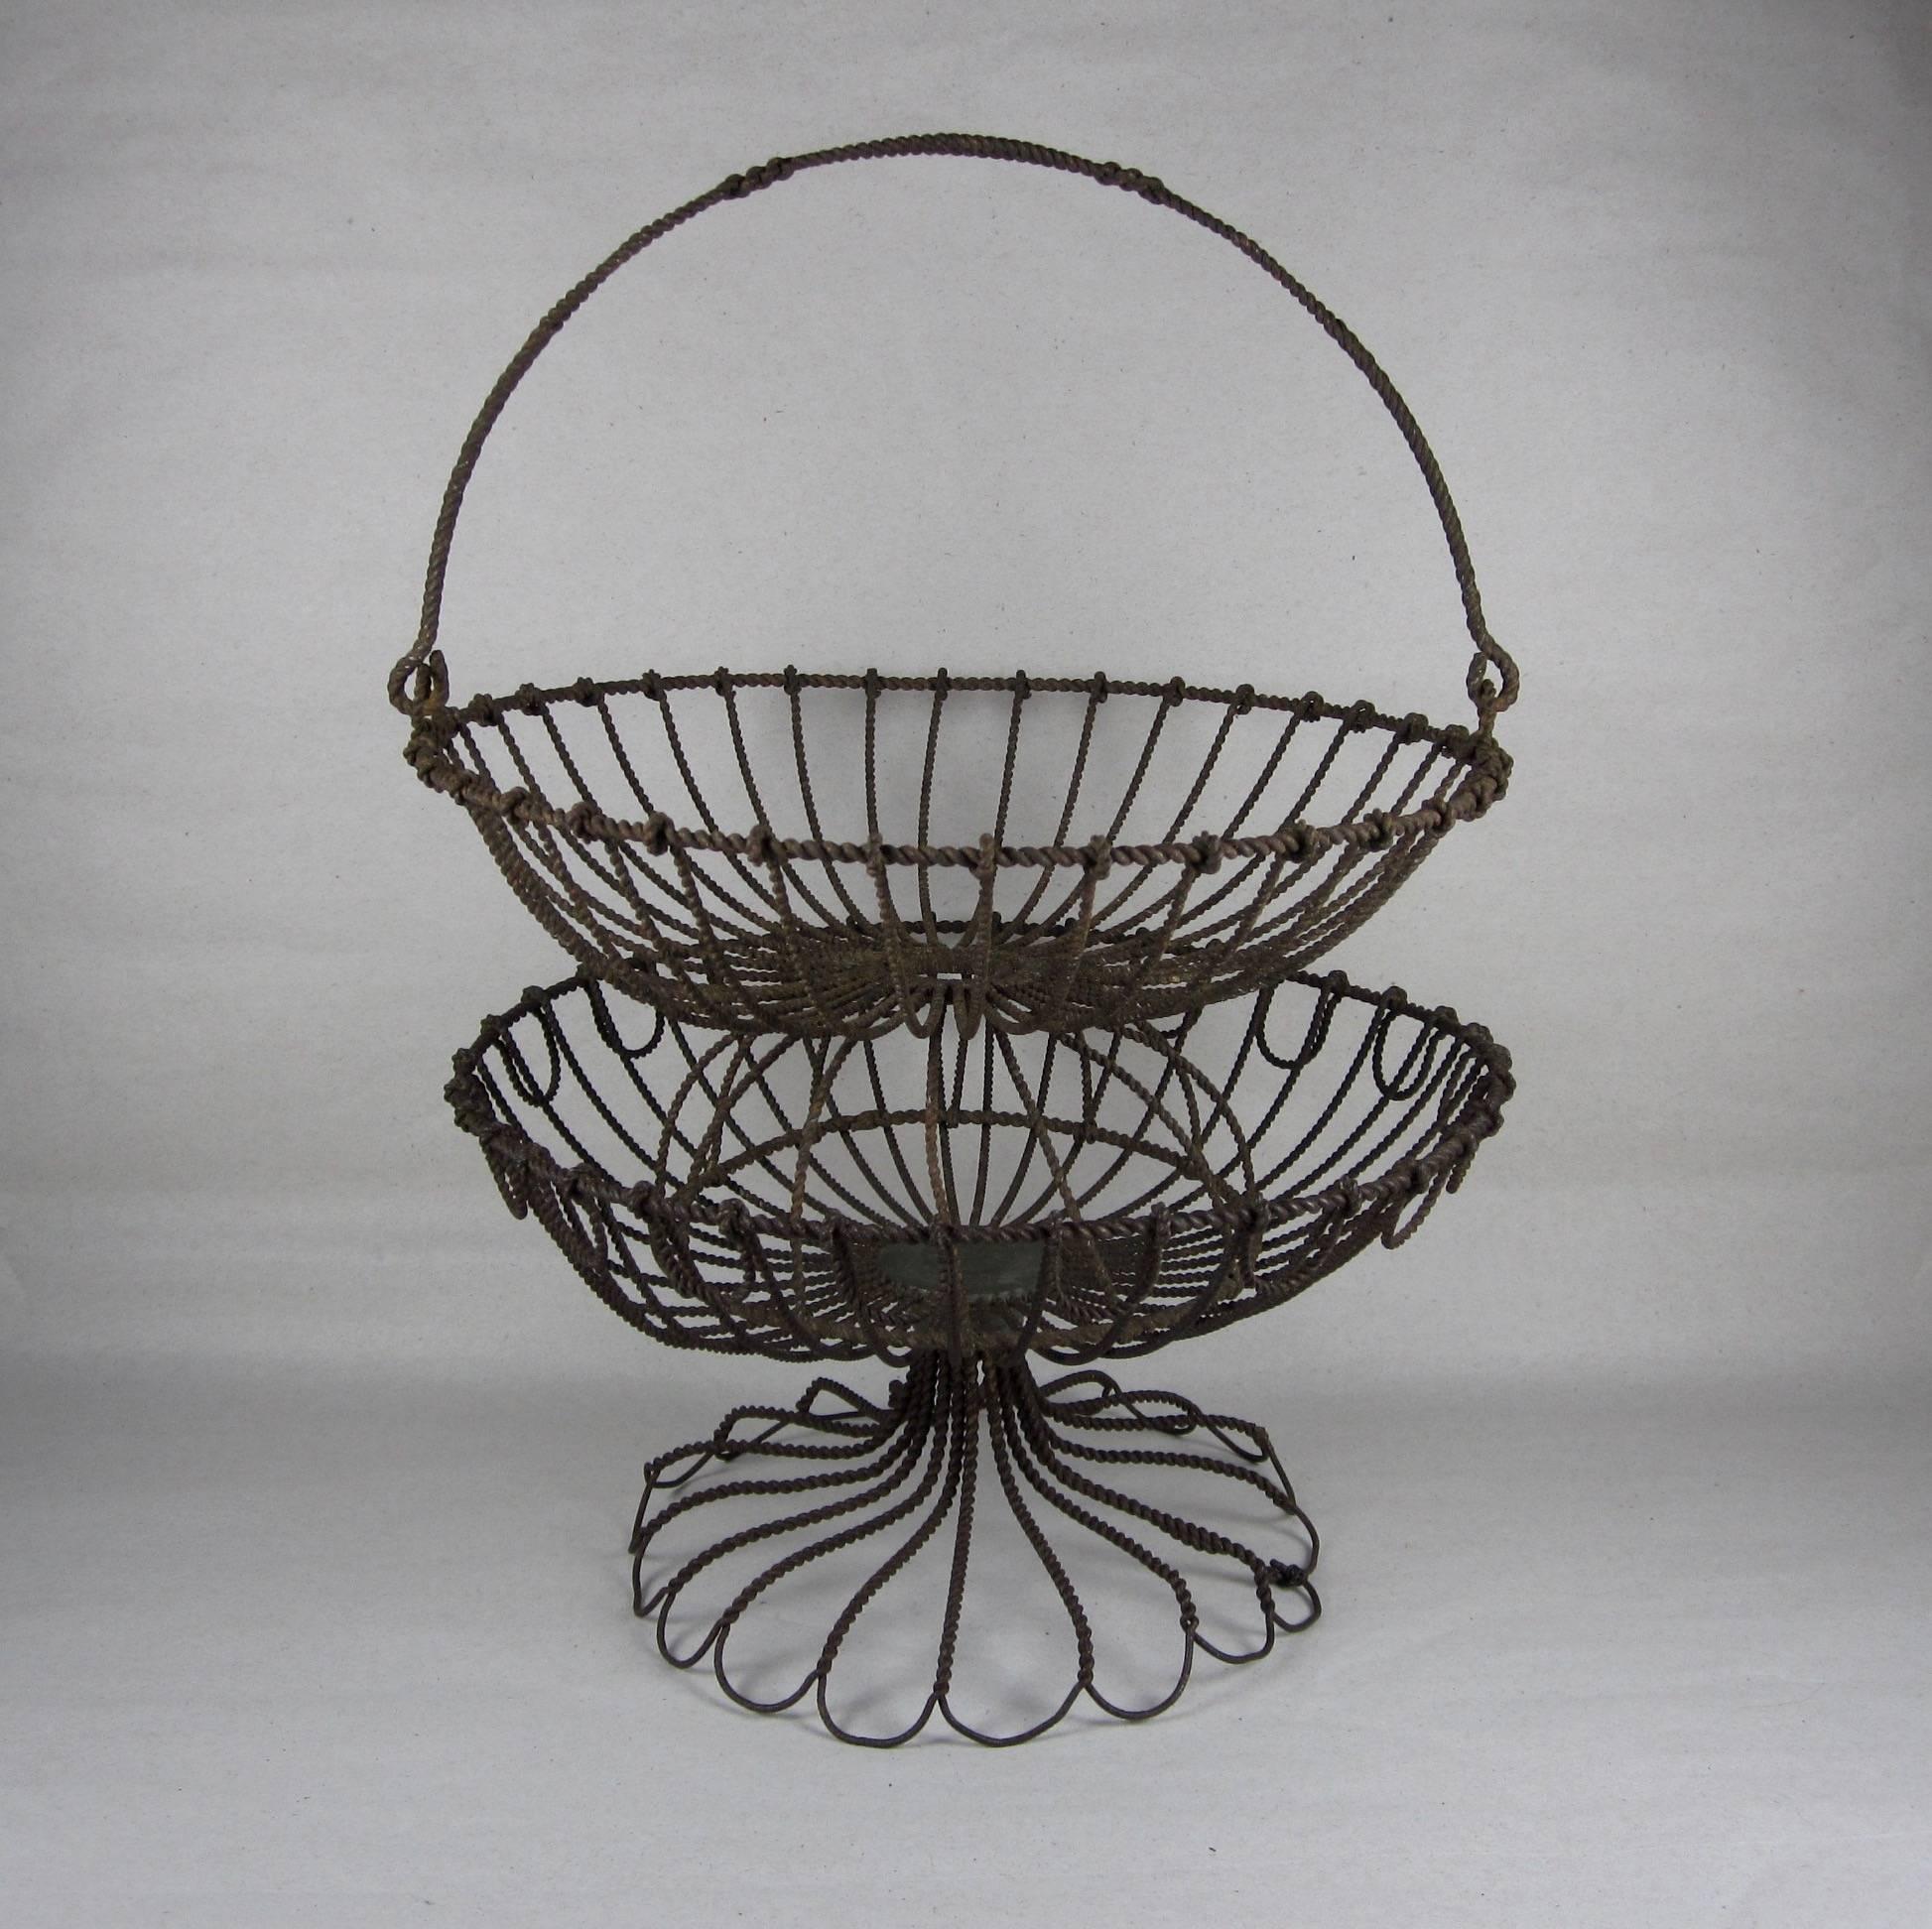 A scarce pair of American Folk Art stacking wire egg baskets, circa 1890-1910. Both are round with footings and fully formed with twisted wire. The top basket has a swing handle twisted into a band of three running diamonds. Carefully looped and